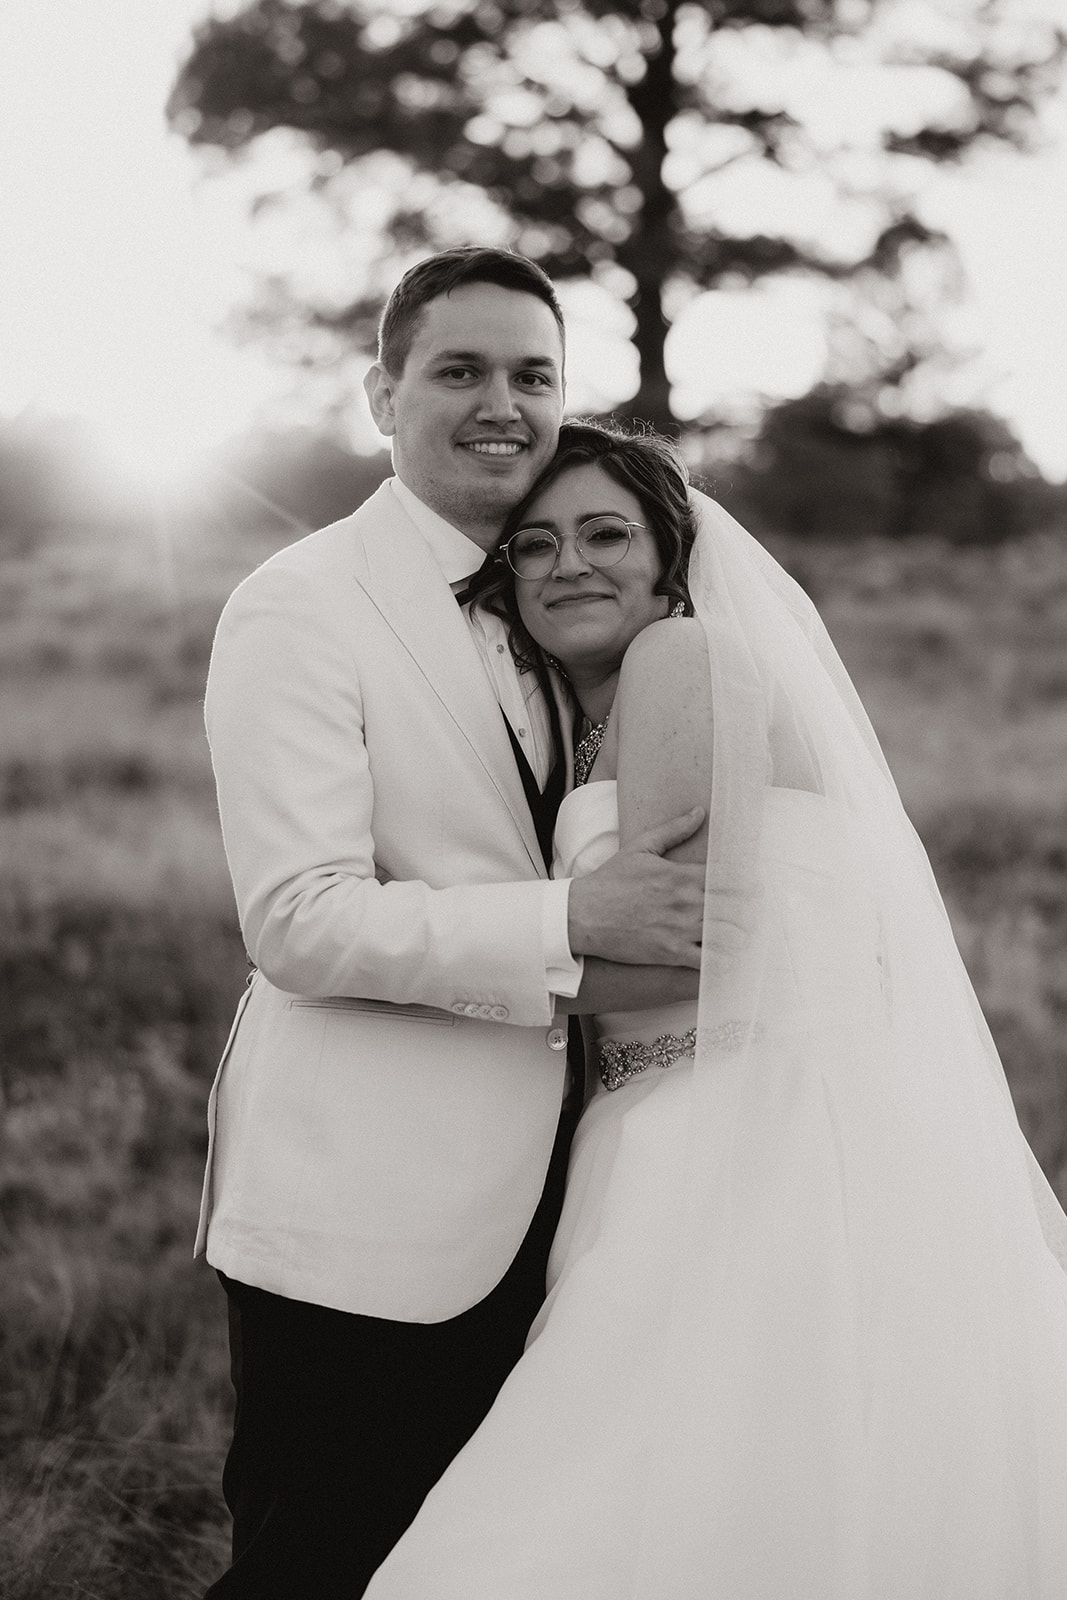 Stunning bride and groom pose together after their dreamy Arizona wedding